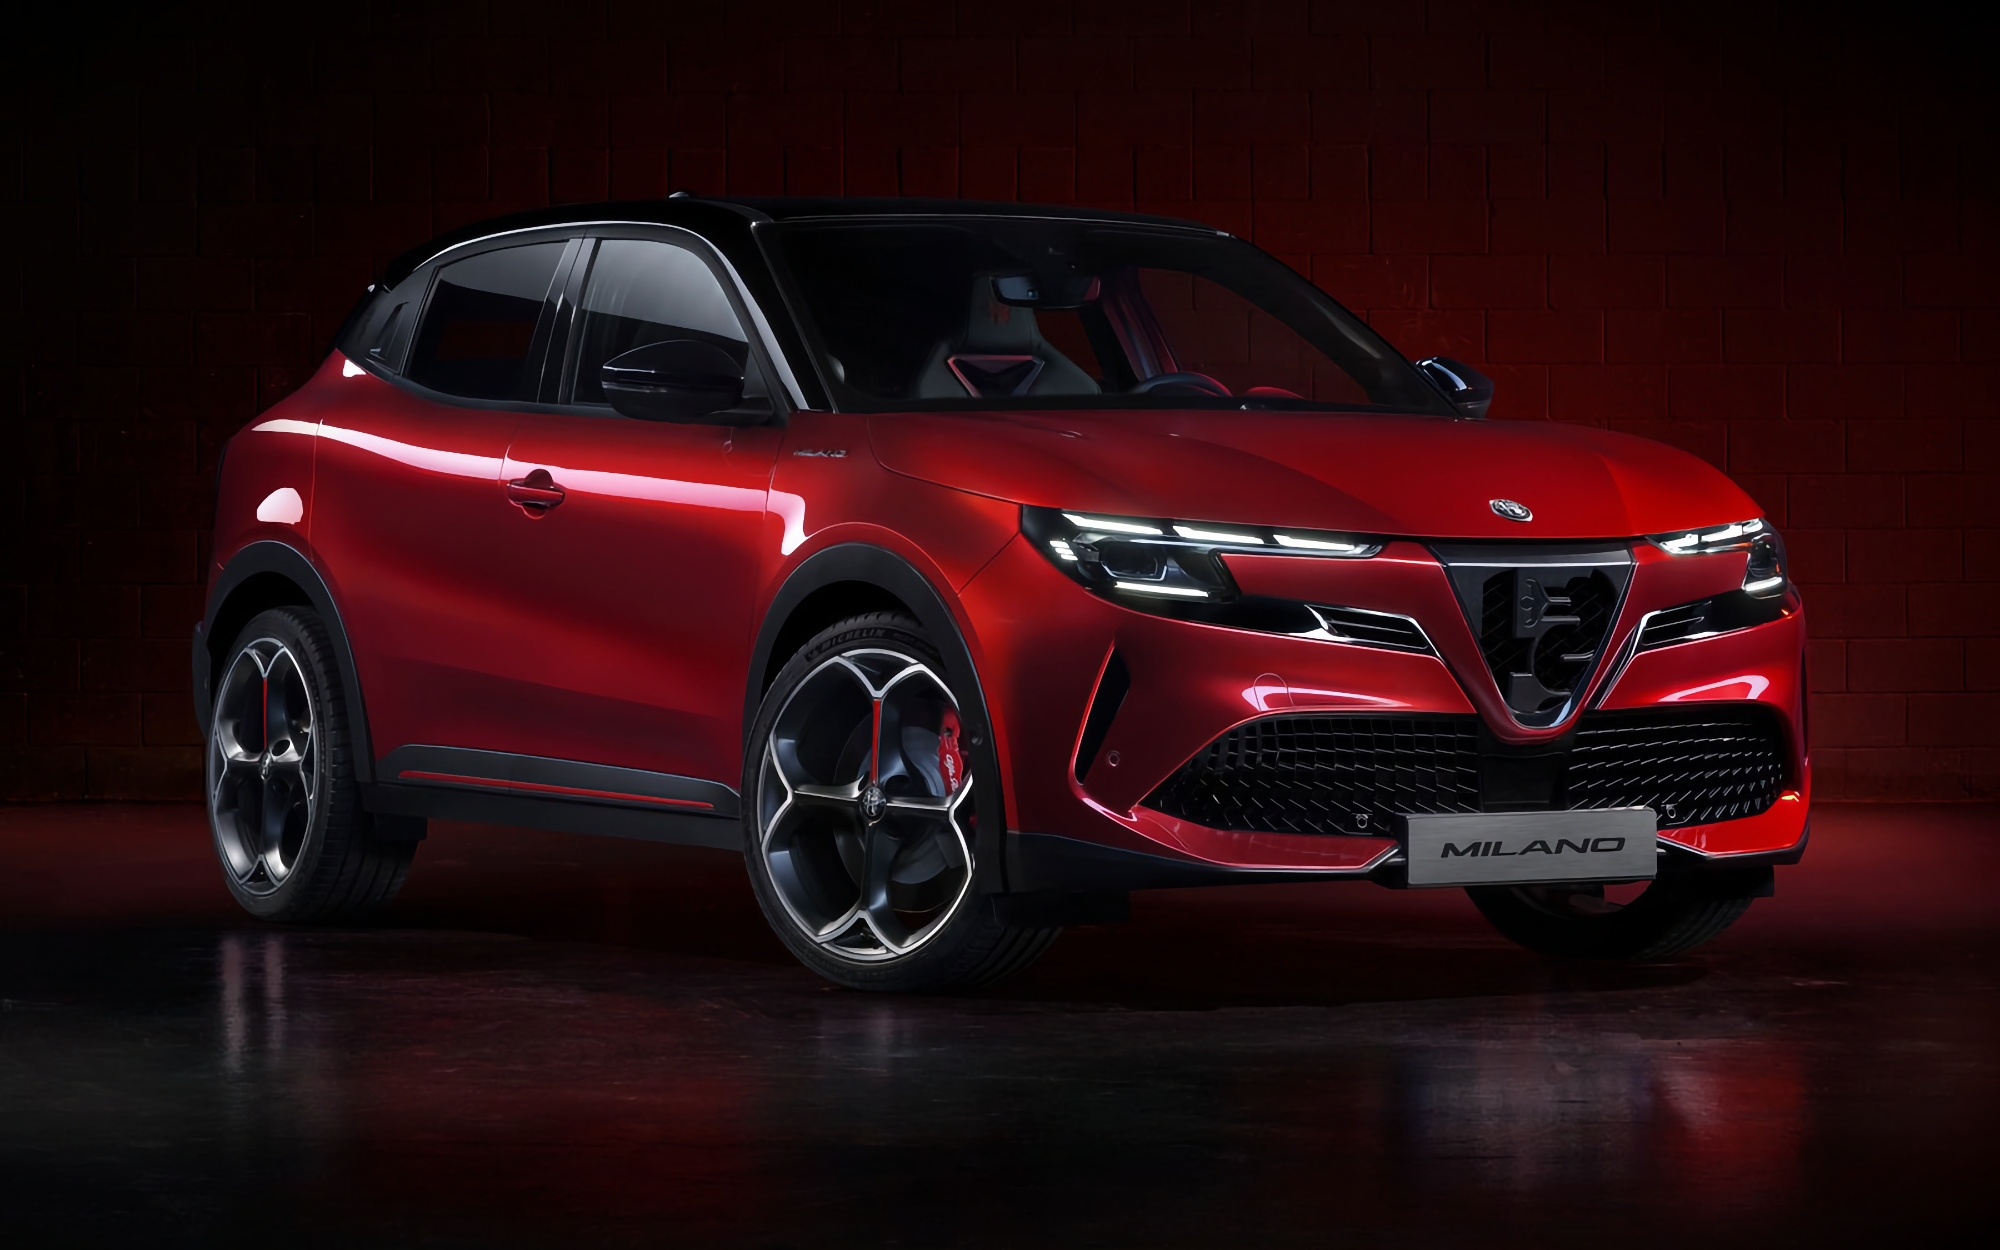 The company's first electric car: Alfa Romeo has unveiled the Milano with a range of up to 410 kilometres and a price starting at 30,000 euros